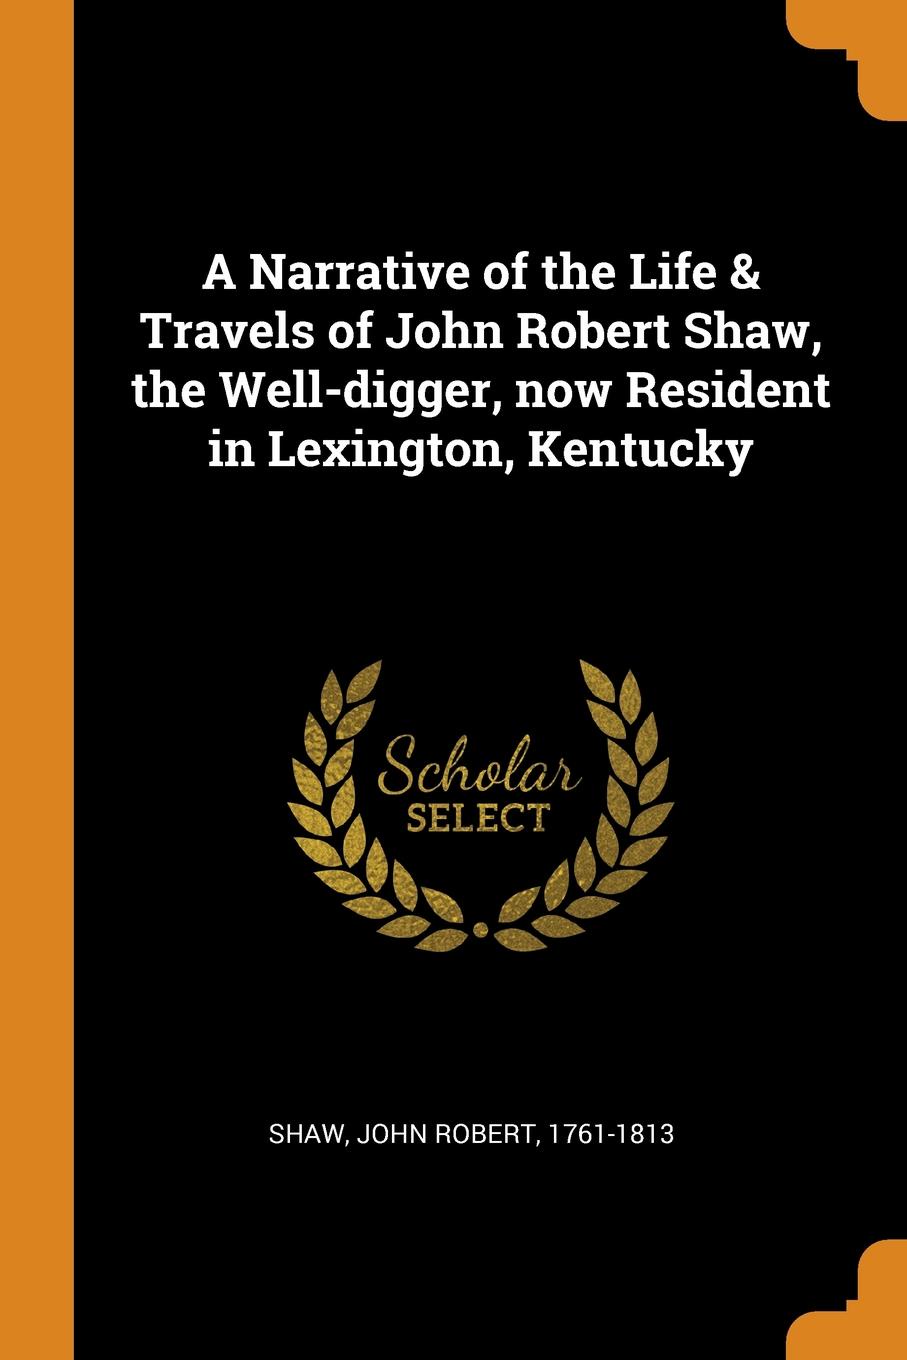 A Narrative of the Life . Travels of John Robert Shaw, the Well-digger, now Resident in Lexington, Kentucky